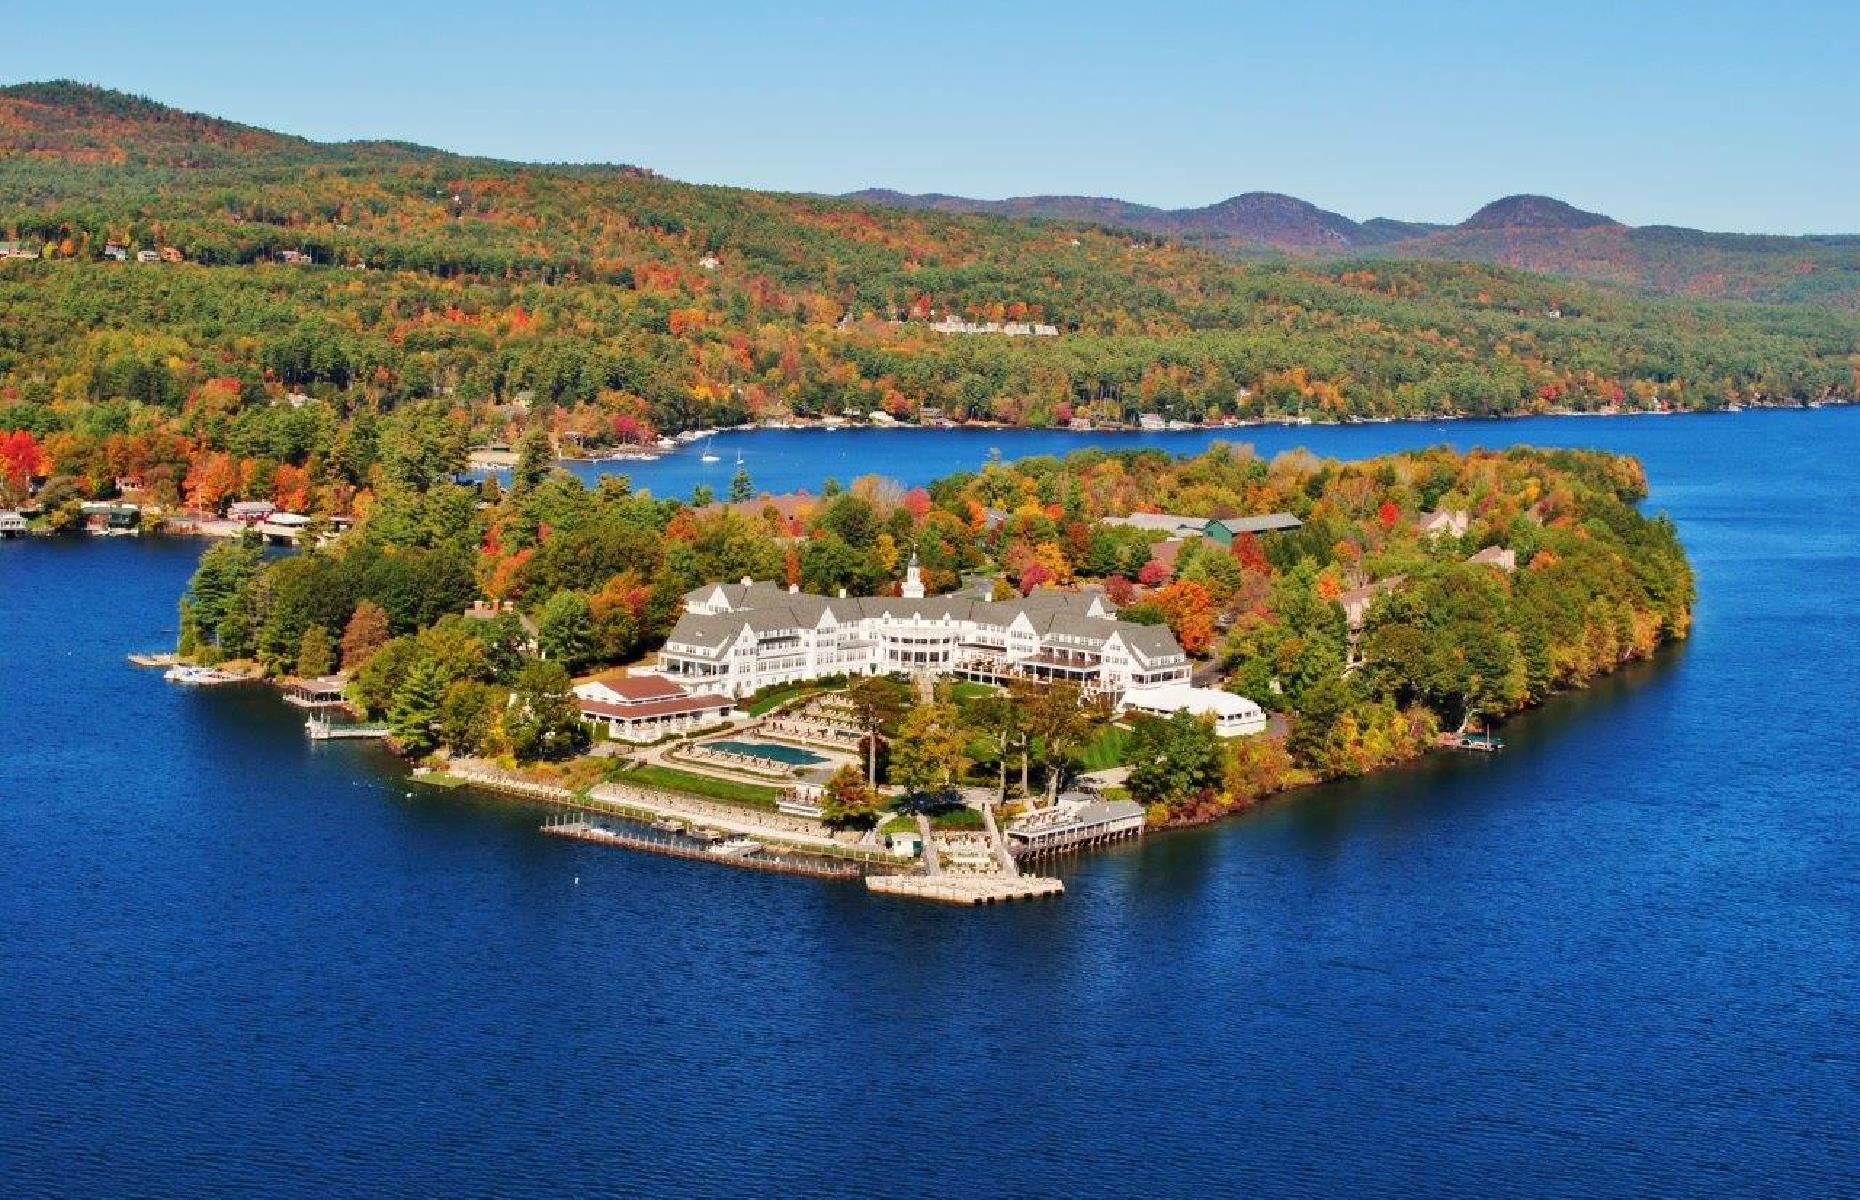 <p>An all-season resort, <a href="https://www.thesagamore.com/">The Sagamore</a> sits on a private island on Lake George with spectacular views of the Adirondack Mountains. Listed on the National Register of Historic Places, the stately hotel was built in the 1880s and immediately attracted fanfare. It was completely restored in the 1980s and once again serves as a beautiful getaway with a golf course, spa and multiple restaurants, as well as skiing and other winter activities available close by.</p>